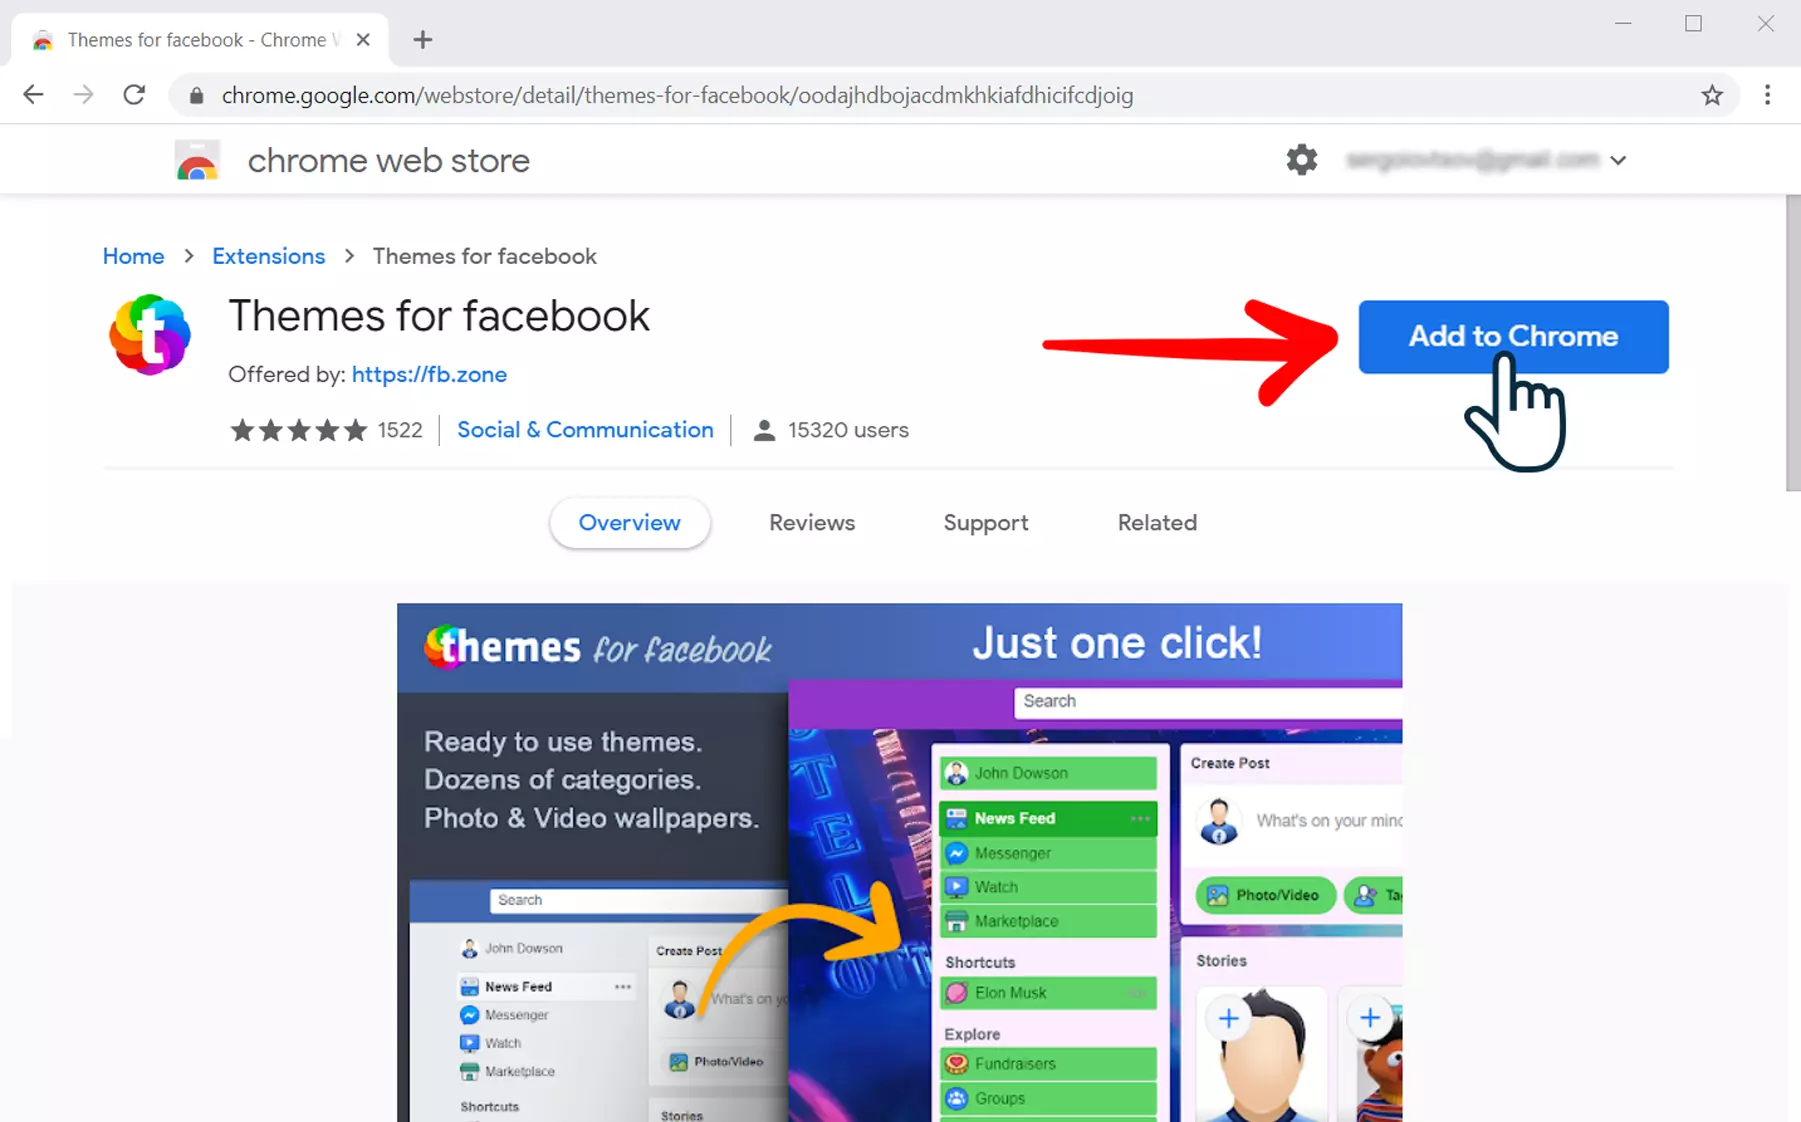 Install Themes for Facebook extension